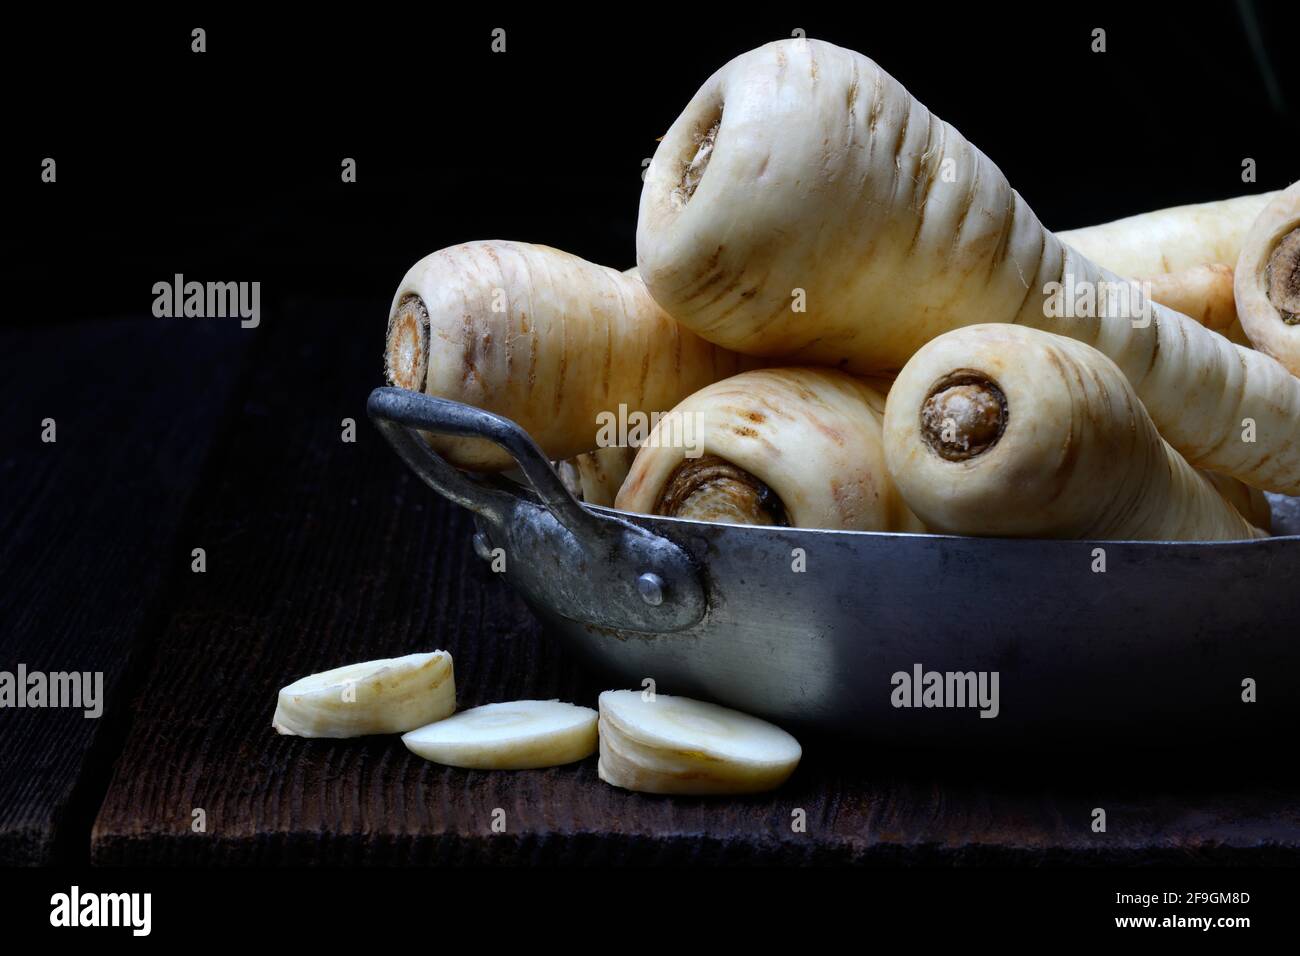 Parsnips in shell, Germany Stock Photo